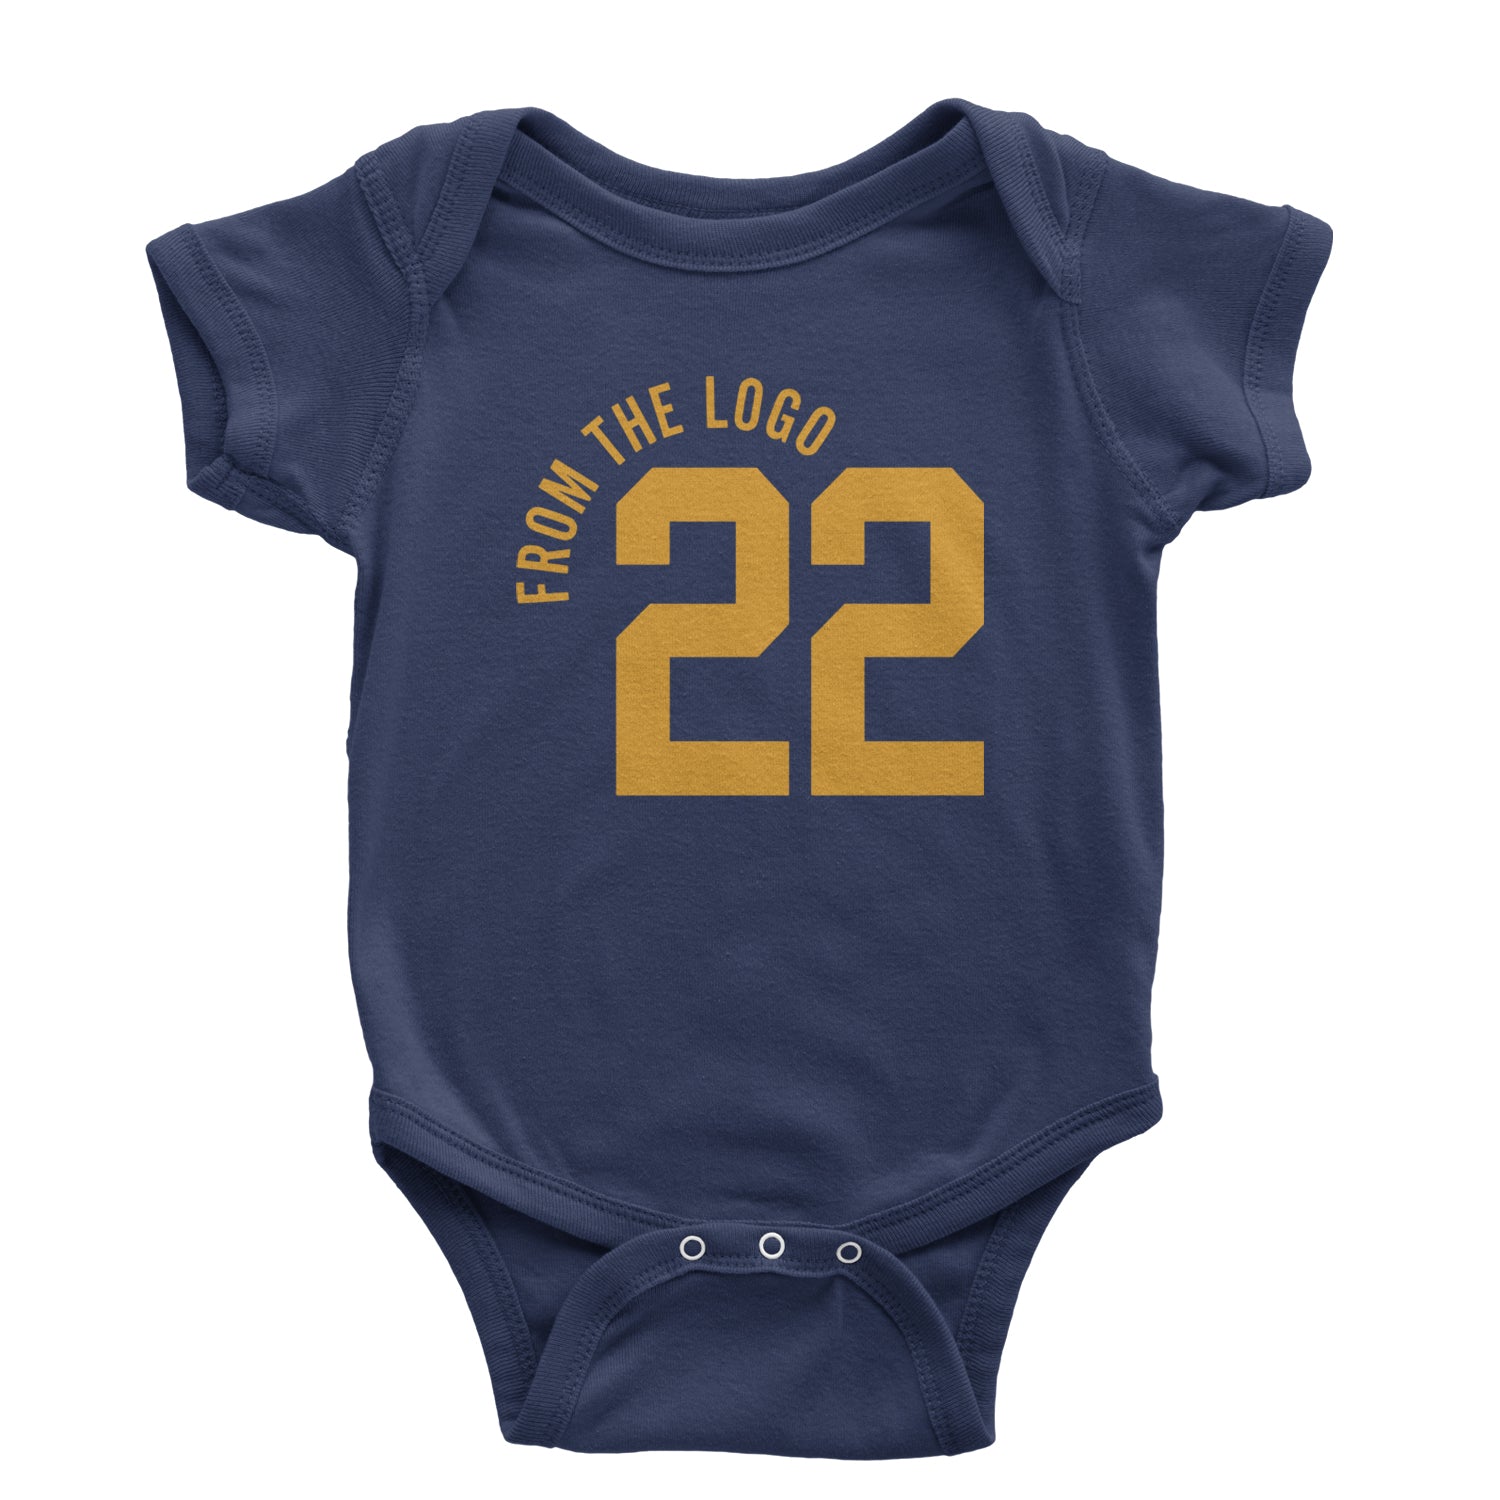 From The Logo #22 Basketball Infant One-Piece Romper Bodysuit and Toddler T-shirt